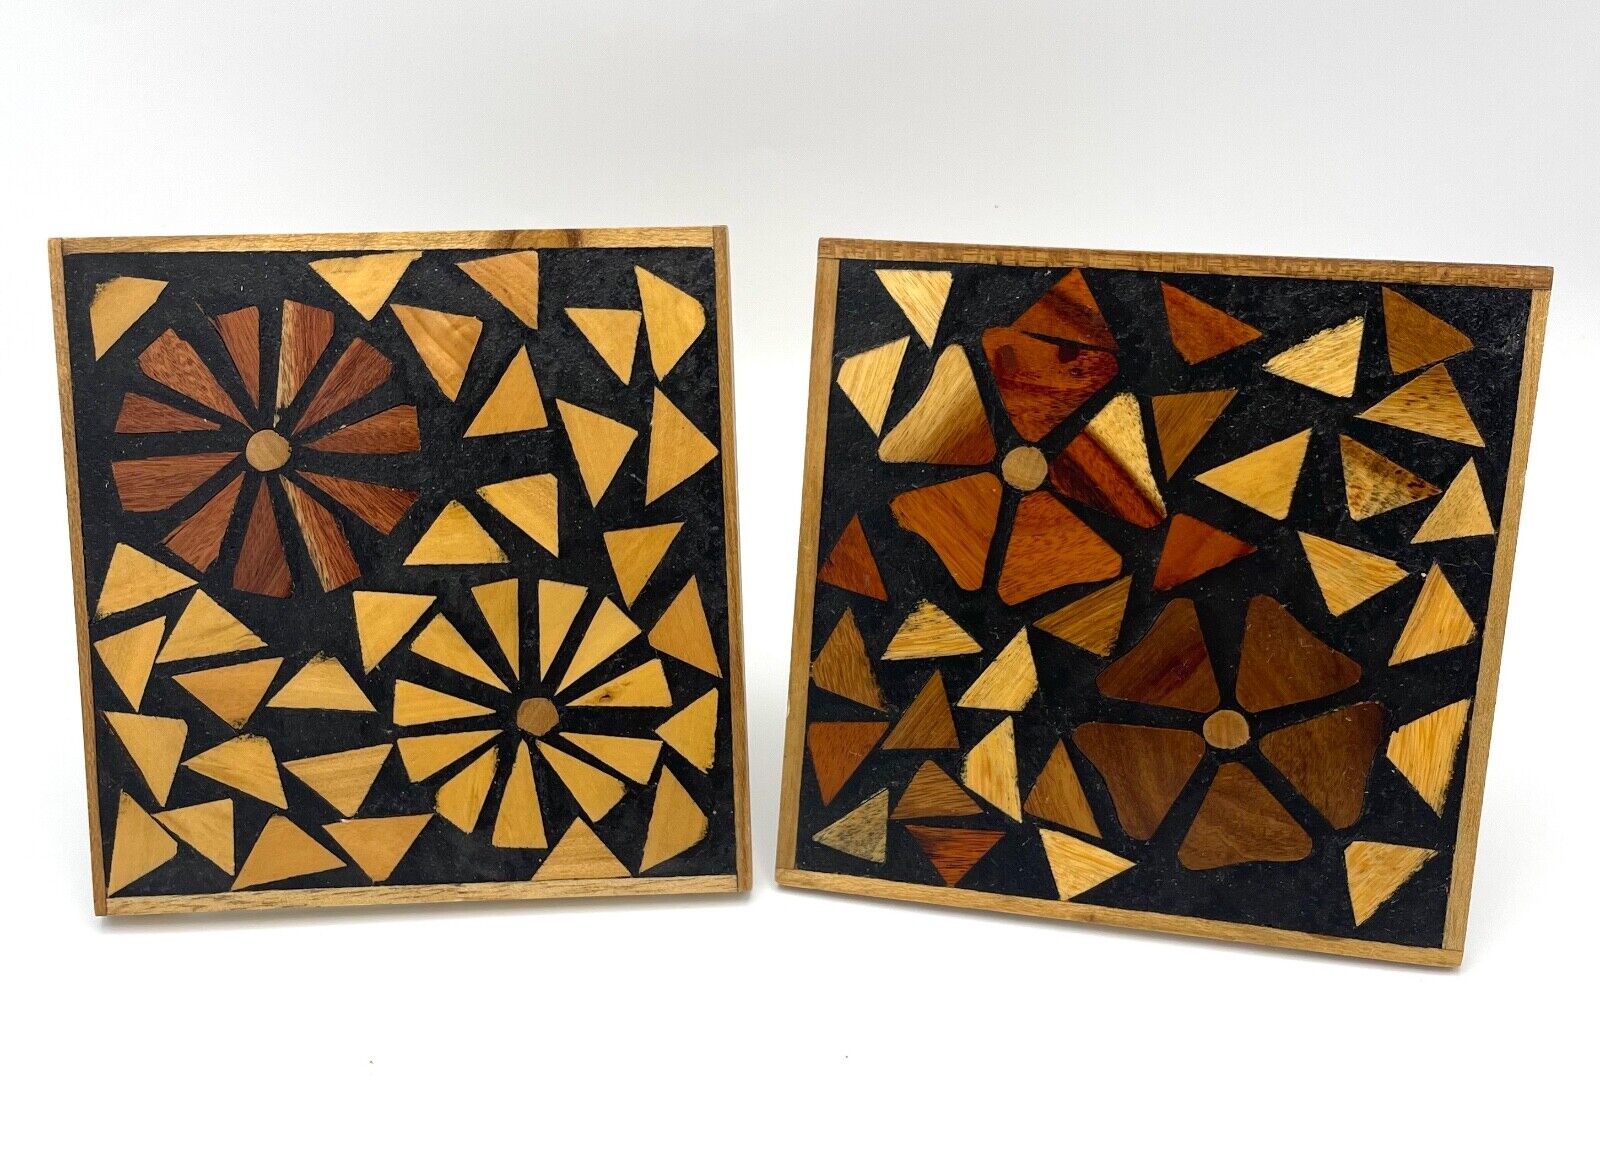 Olga Fisch Folklore Wooden Trivets w/ Inlaid Wood in Geometric Pattern, Set of 2